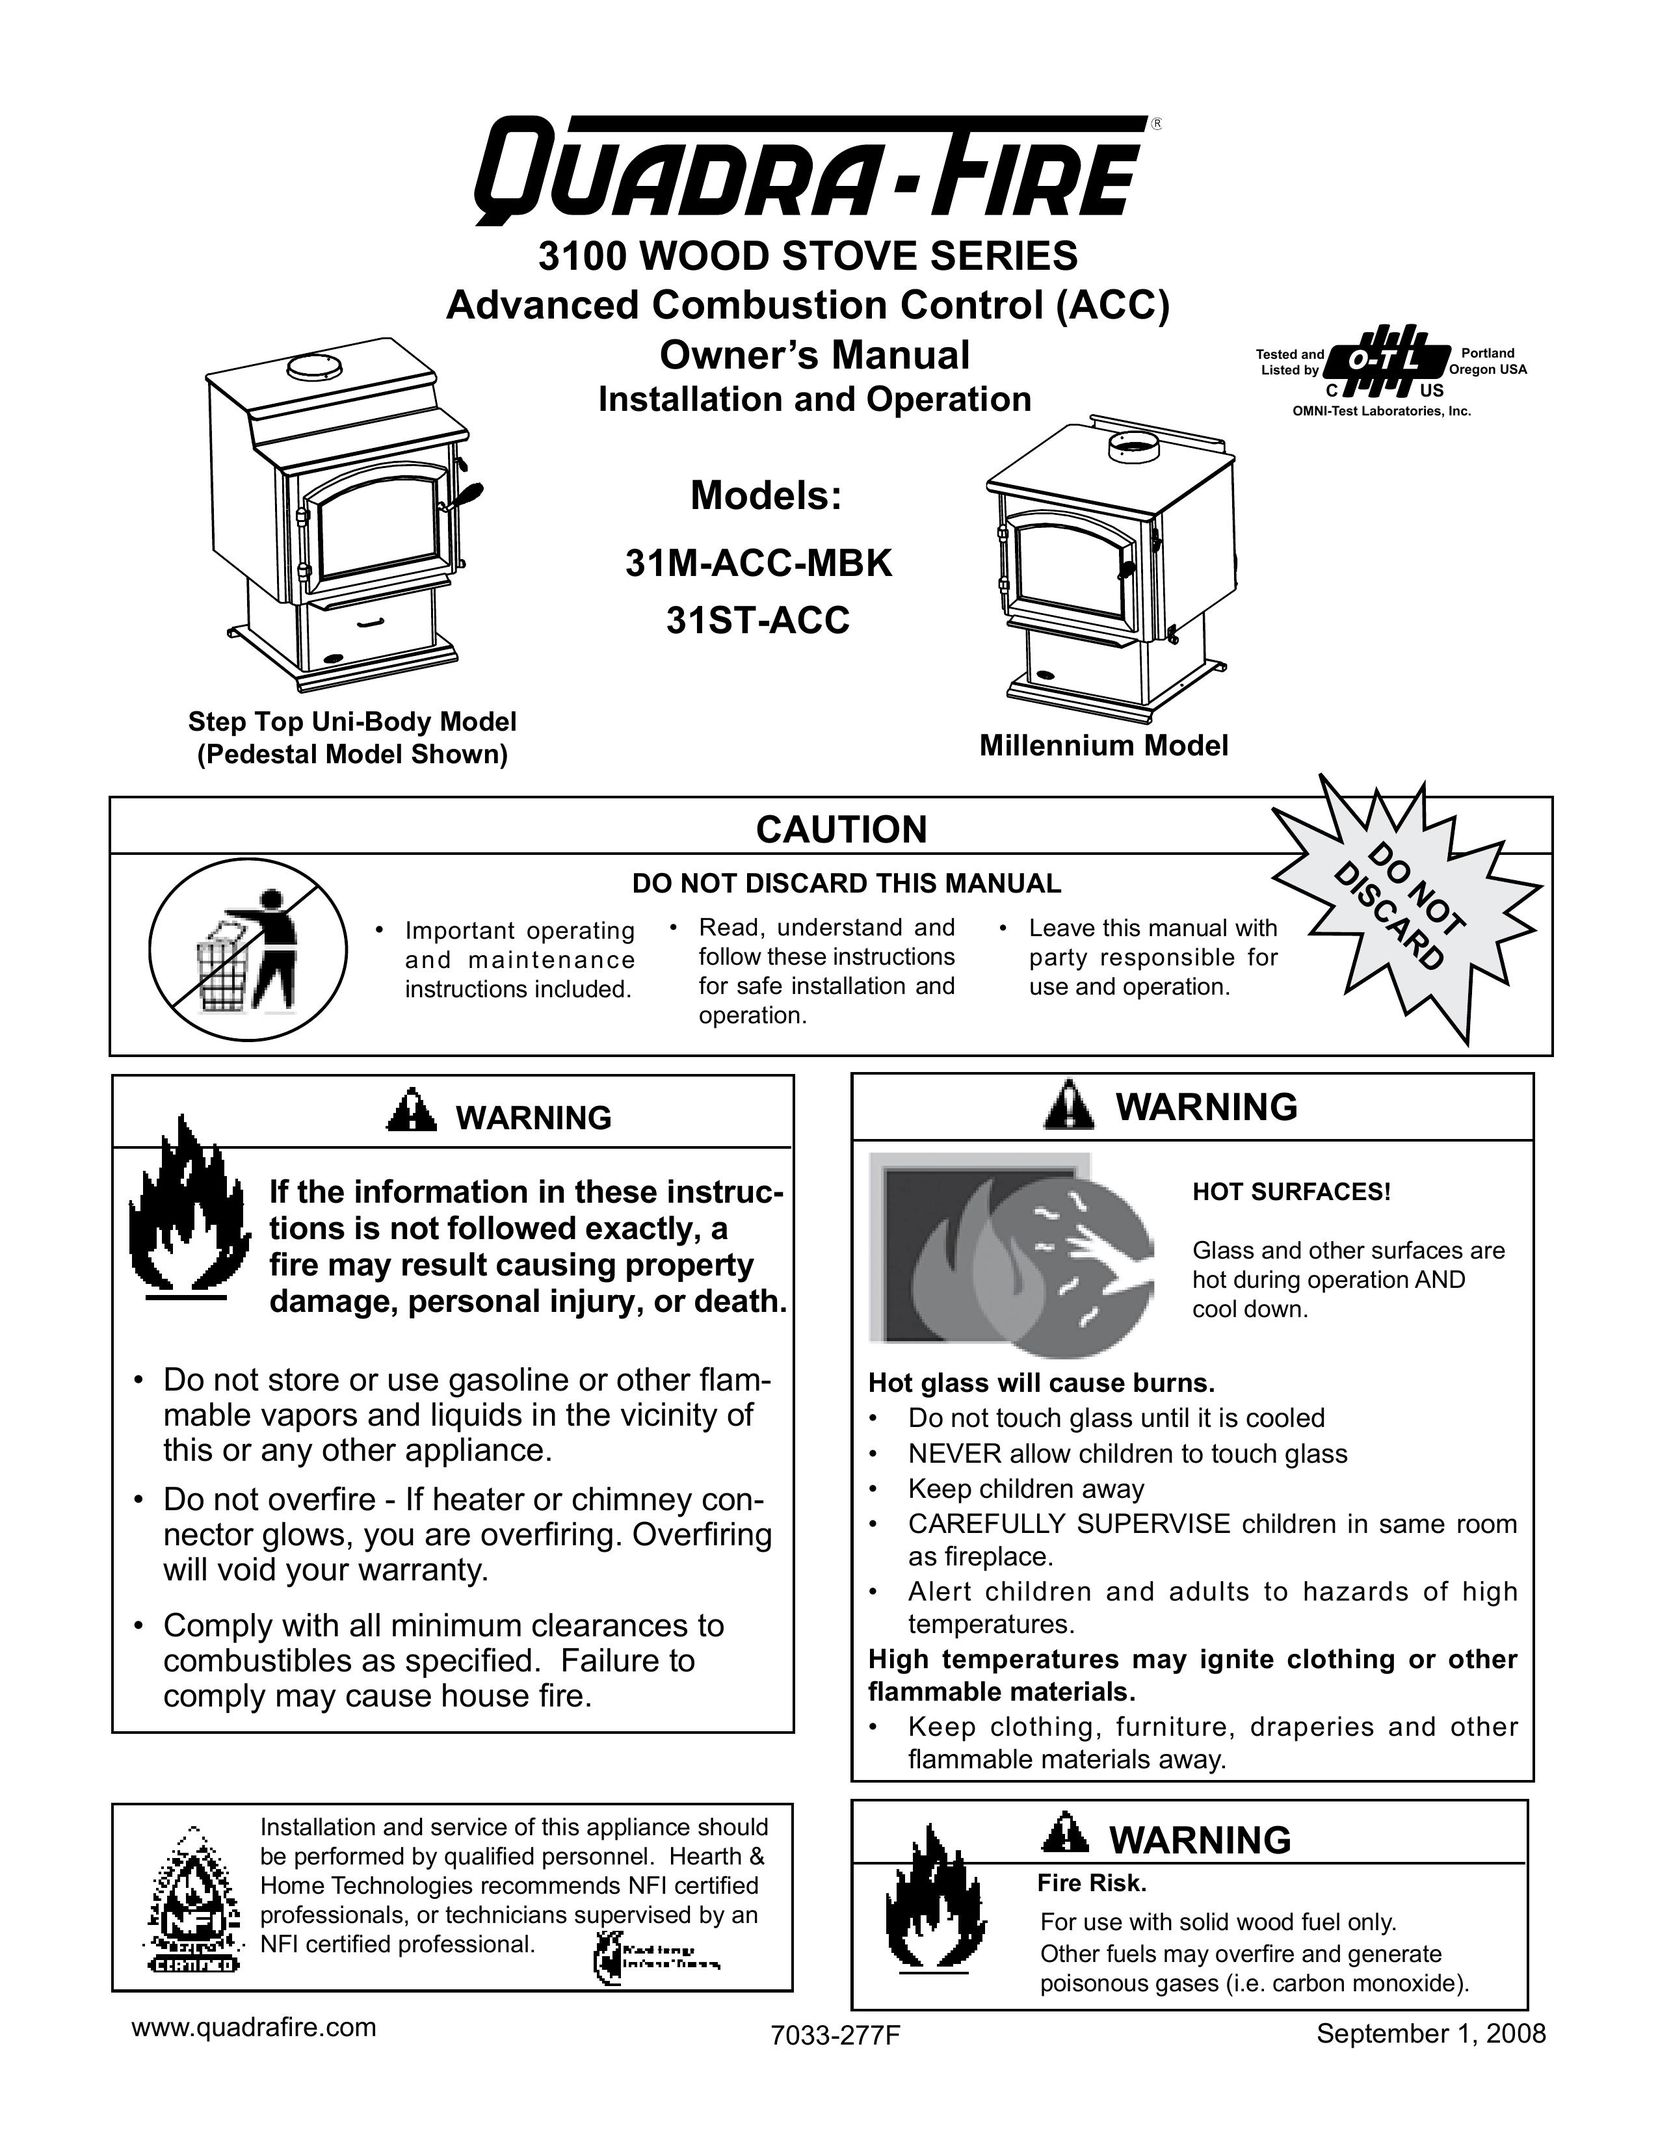 Hearth and Home Technologies 31M-ACC-MBK Stove User Manual